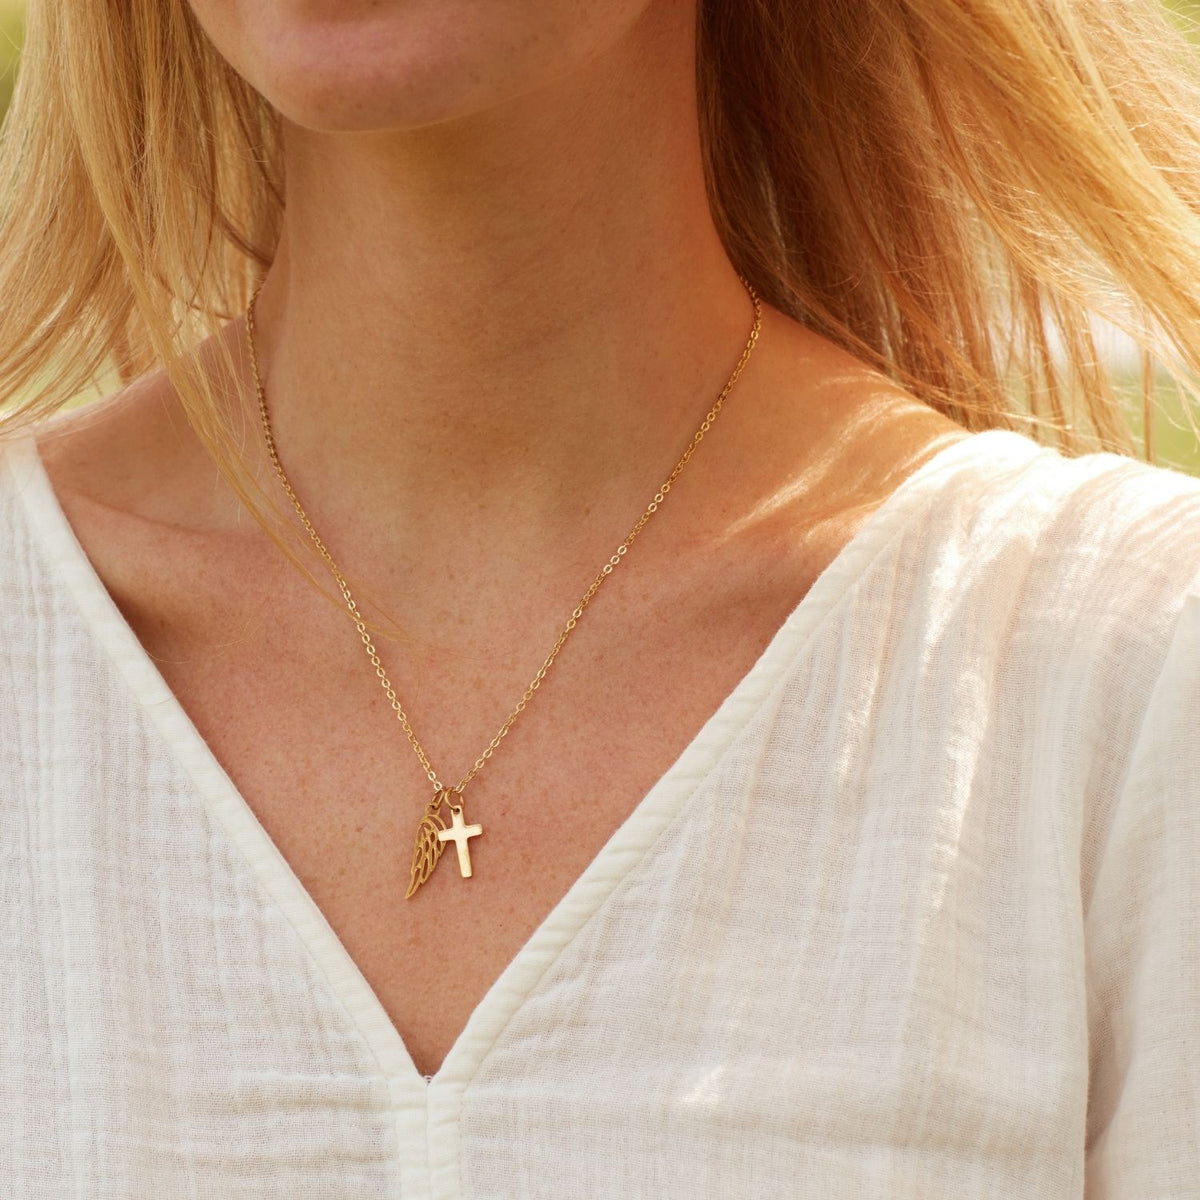 Happy First Communion | God&#39;s Grace Stay Upon You | Cross Necklace